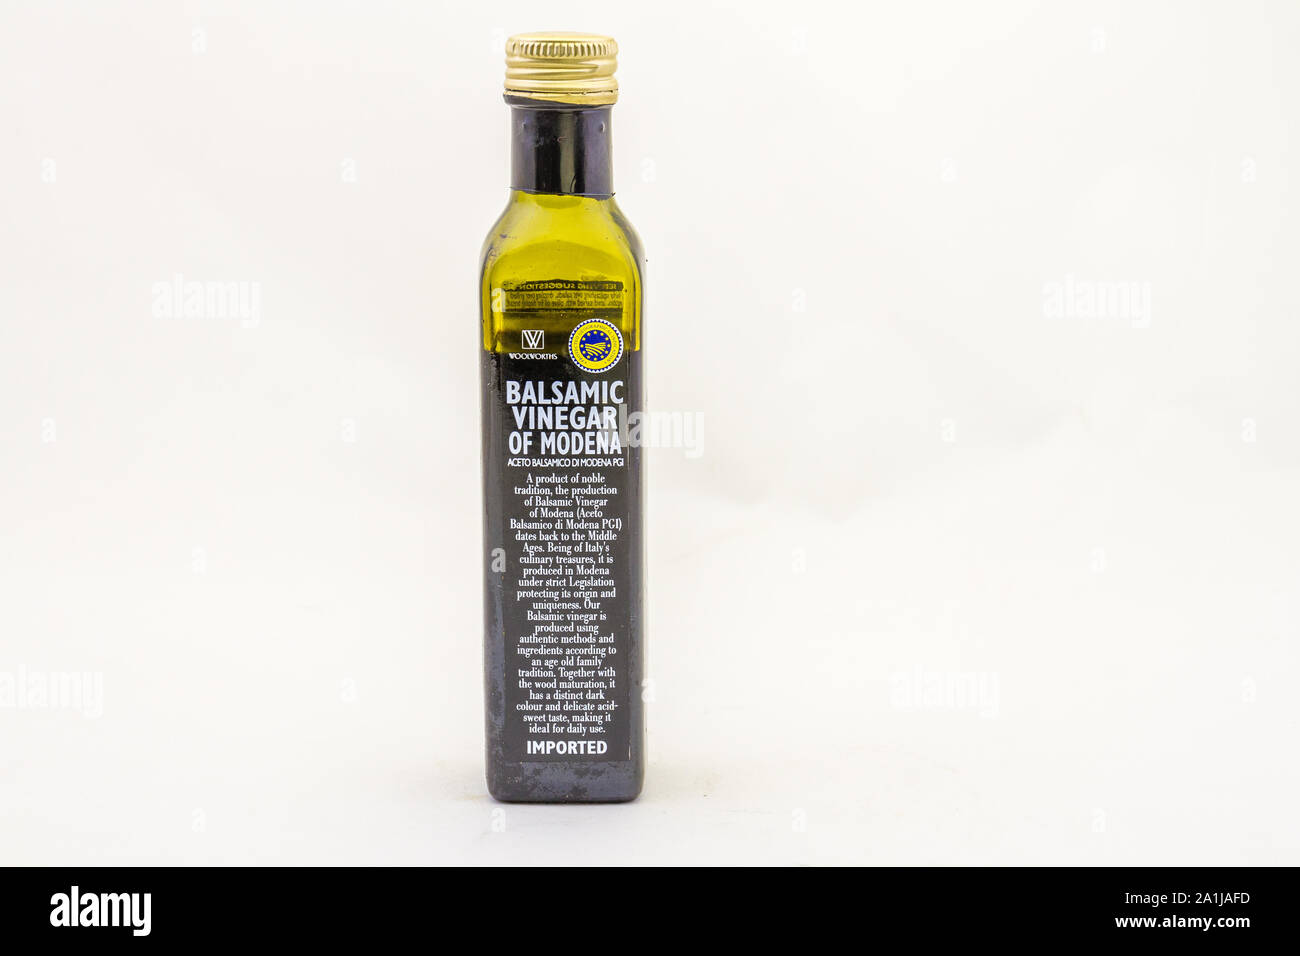 Alberton, South Africa - a bottle of imported Balsamic vinegar of Modena isolated on a clear background image with copy space Stock Photo